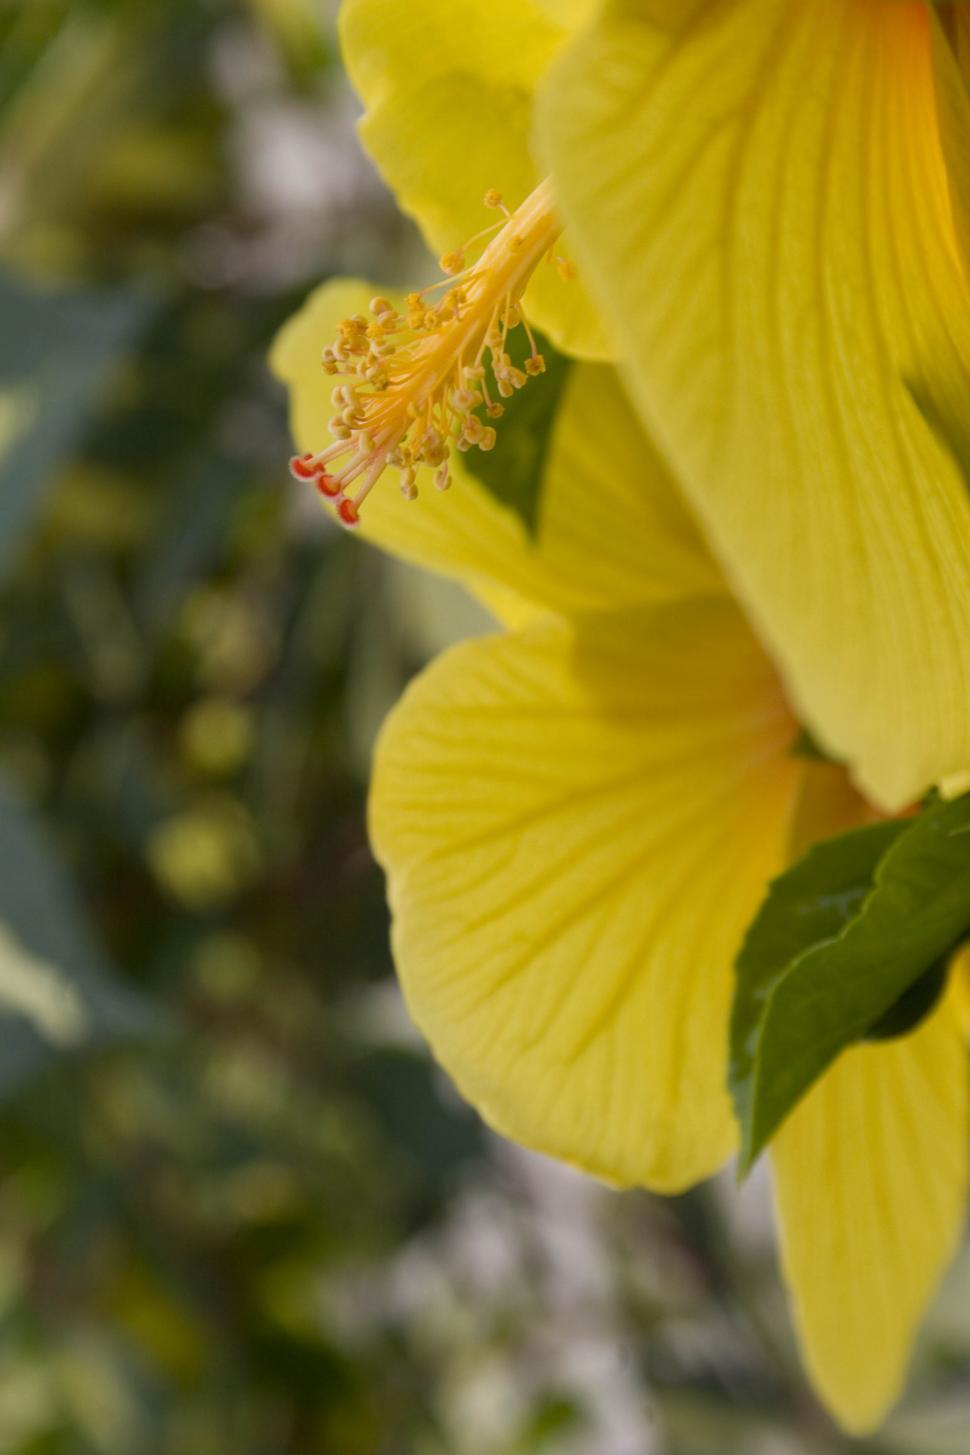 Free Image of Yellow Flower With Green Leaves 